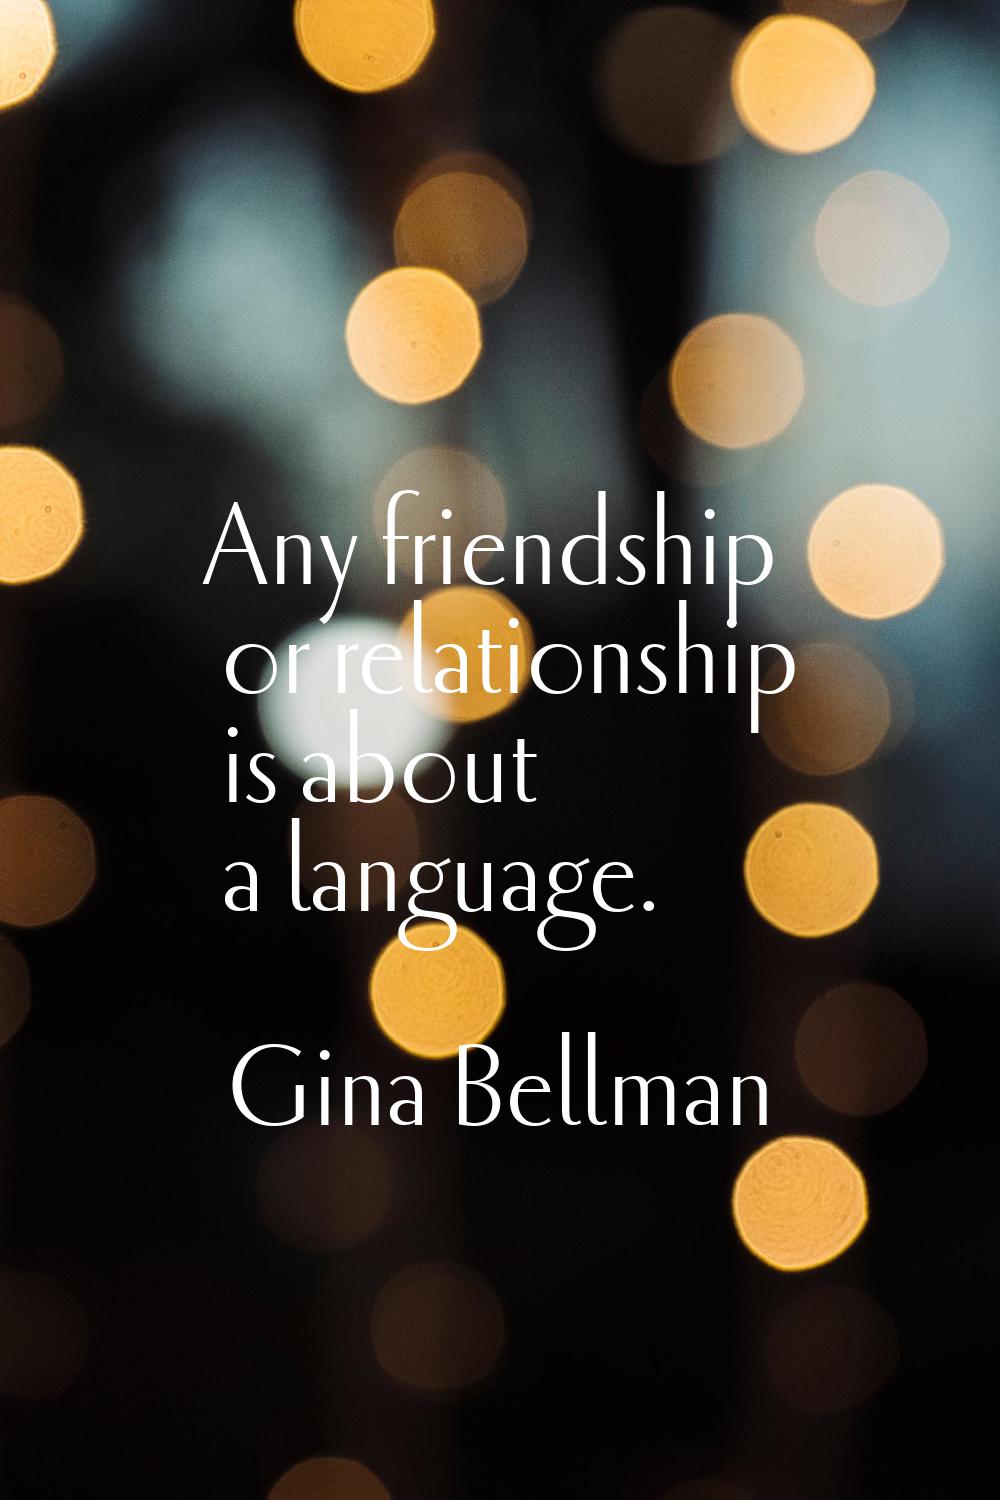 Any friendship or relationship is about a language.